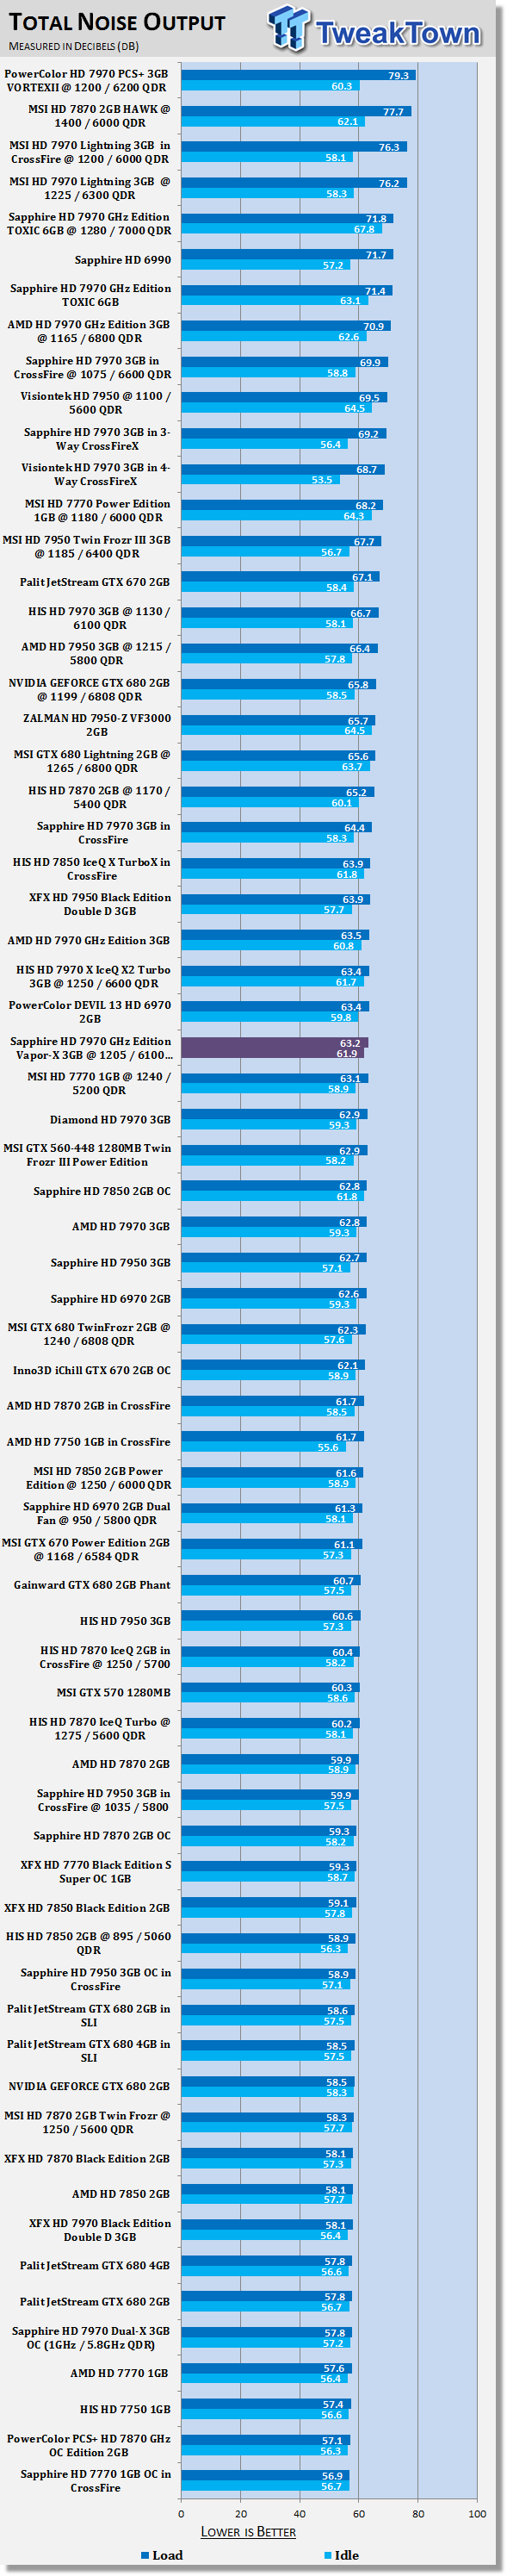 http://images.tweaktown.com/content/4/8/4883_41_sapphire_radeon_hd_7970_ghz_edition_vapor_x_3gb_overclocked_video_card_review.png